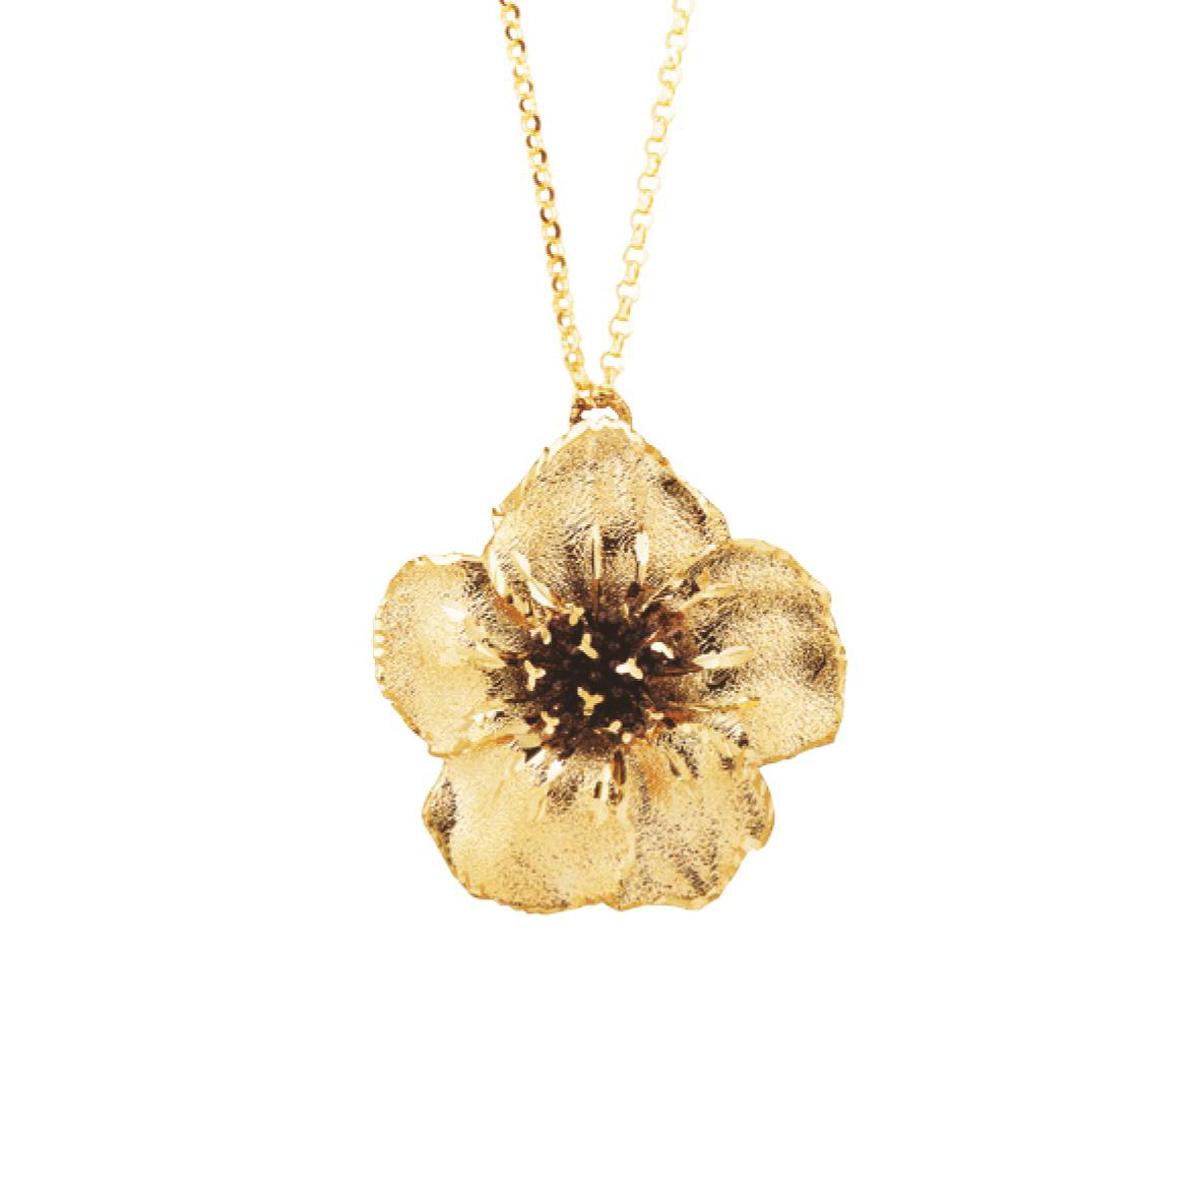 Petunia two-tone and satin necklace in 18kt gold - CEA1818